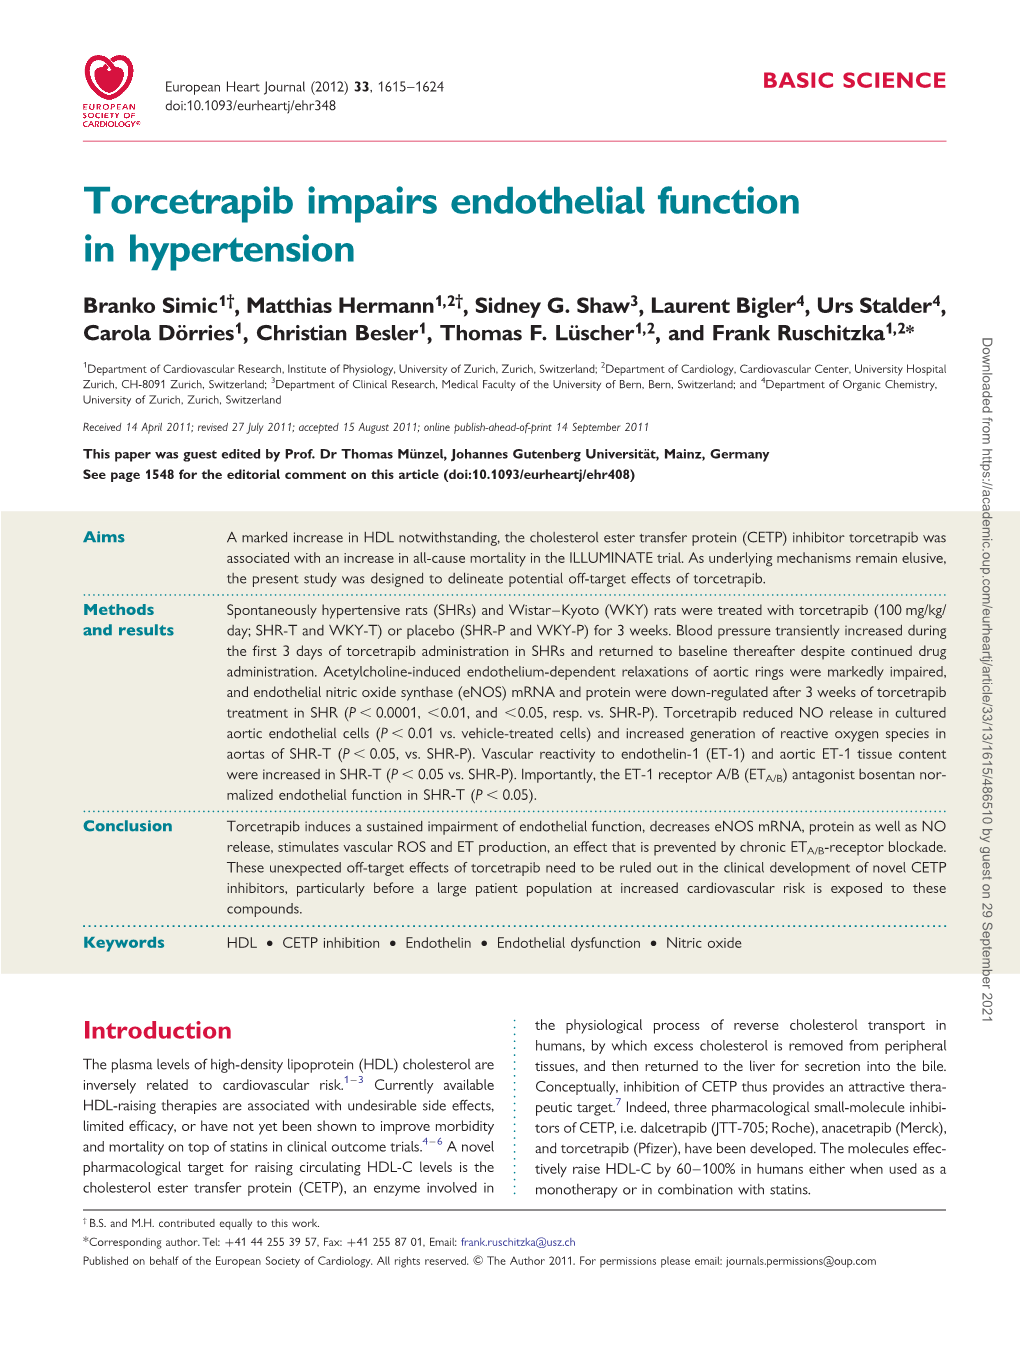 Torcetrapib Impairs Endothelial Function in Hypertension